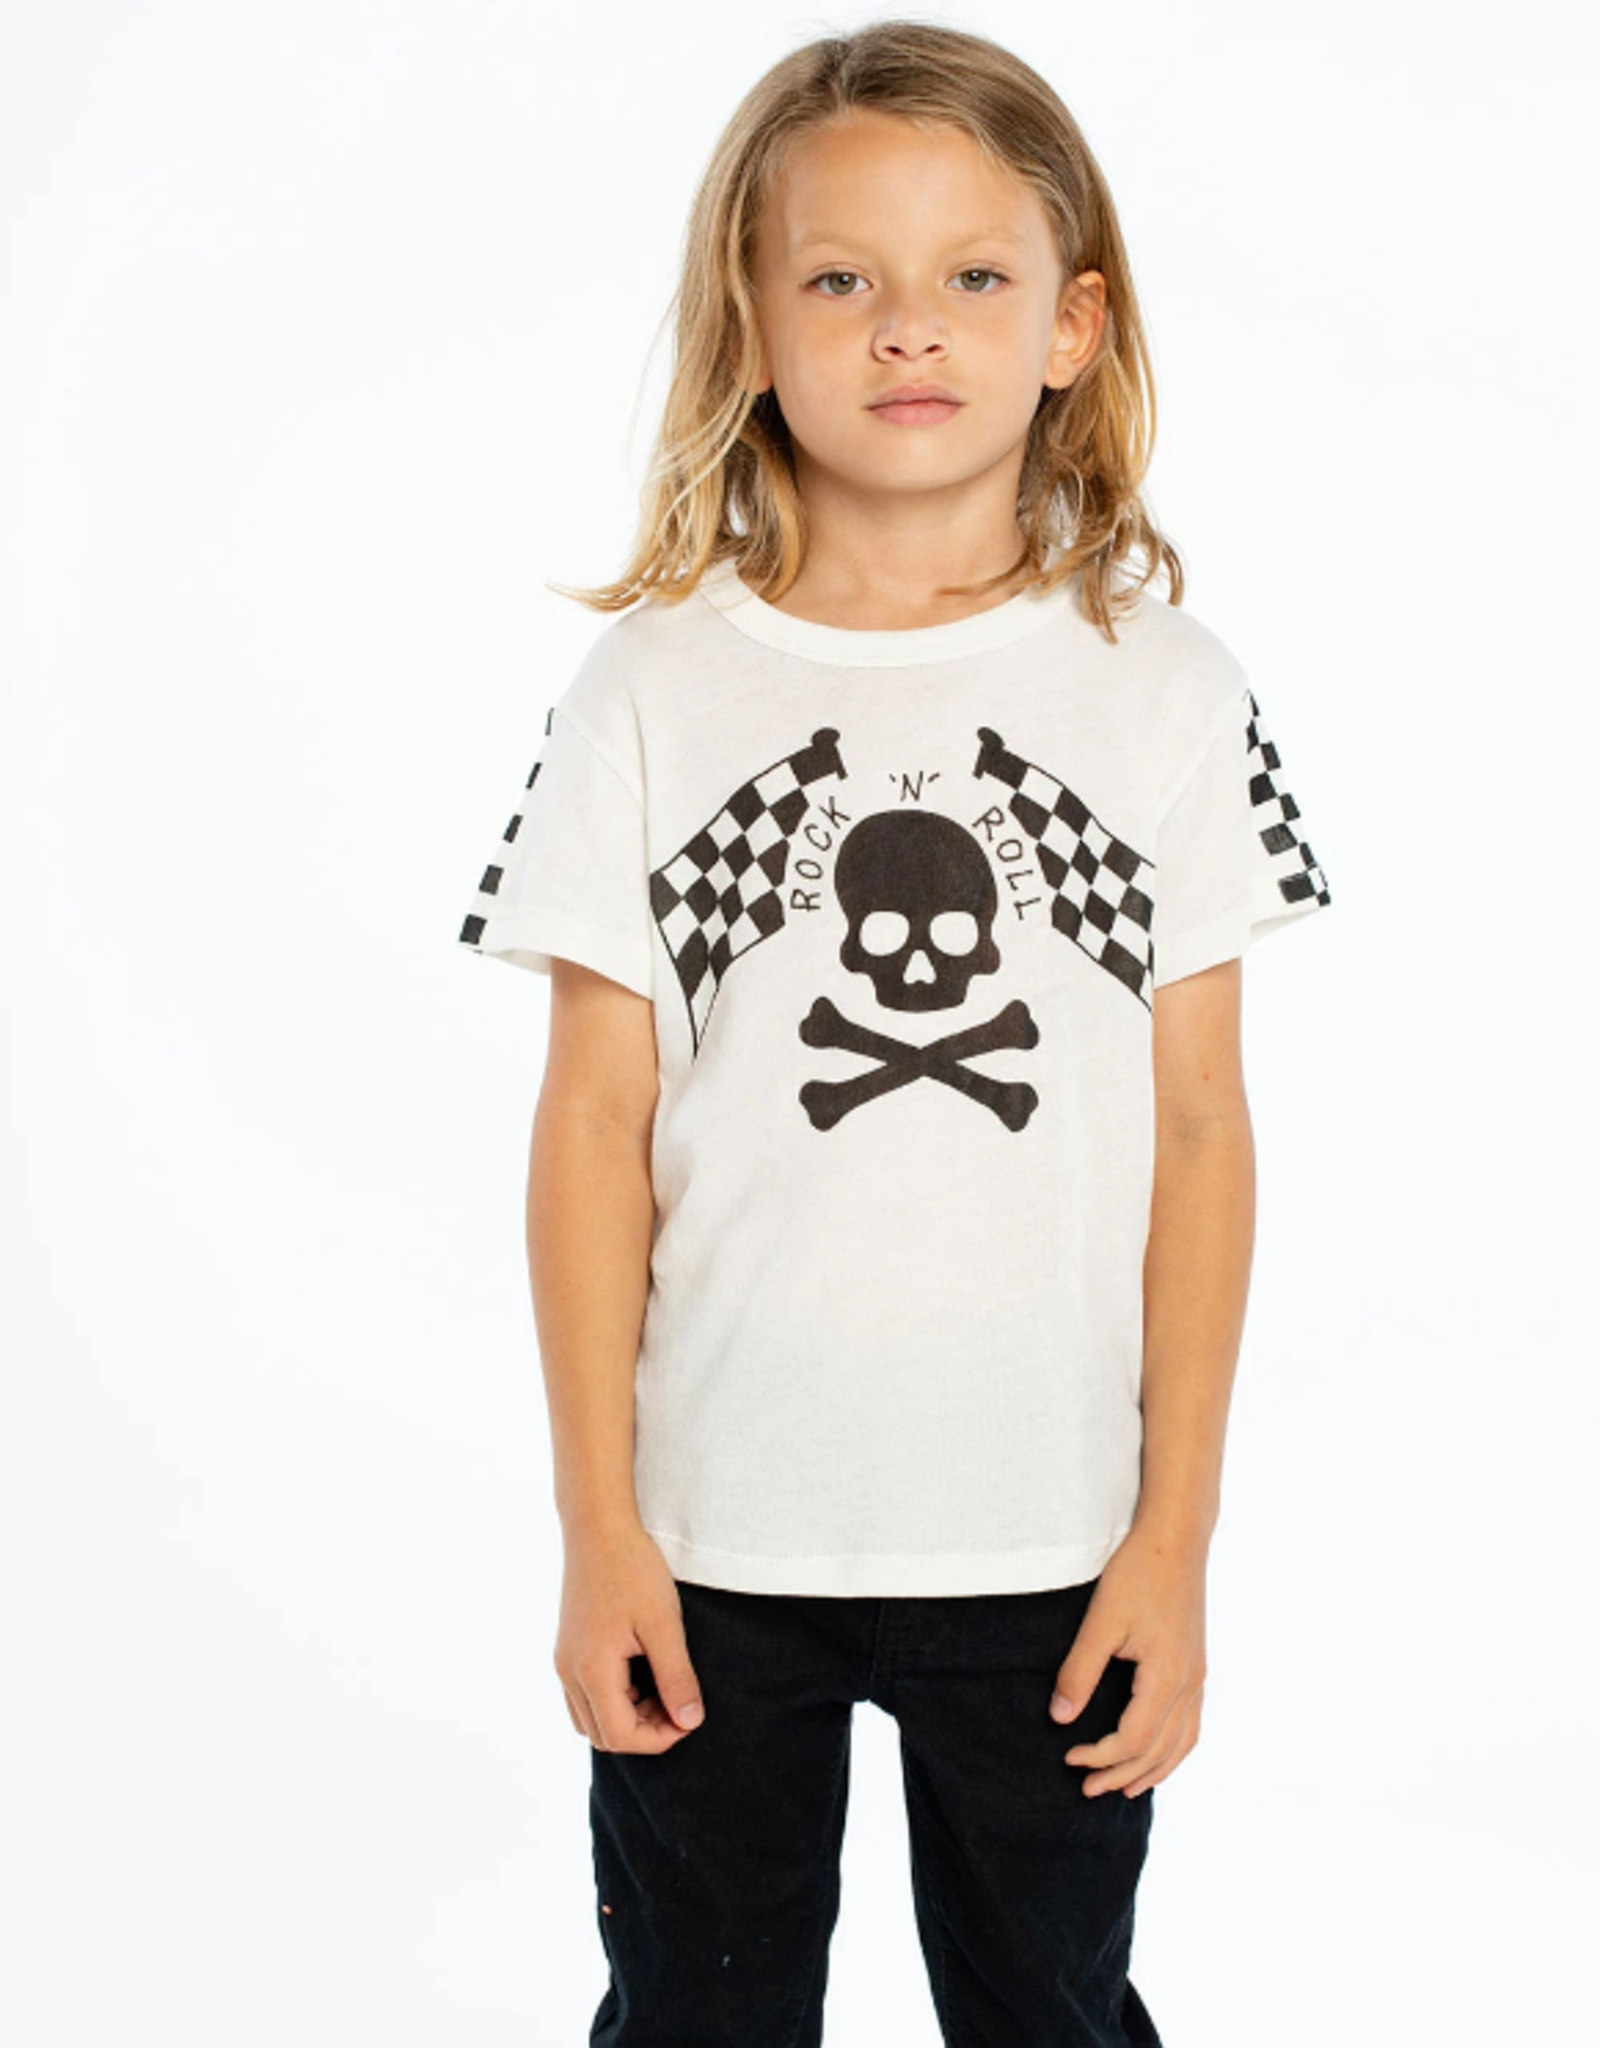 Chaser Chaser - Boys Gauzy Cotton S/S Tee